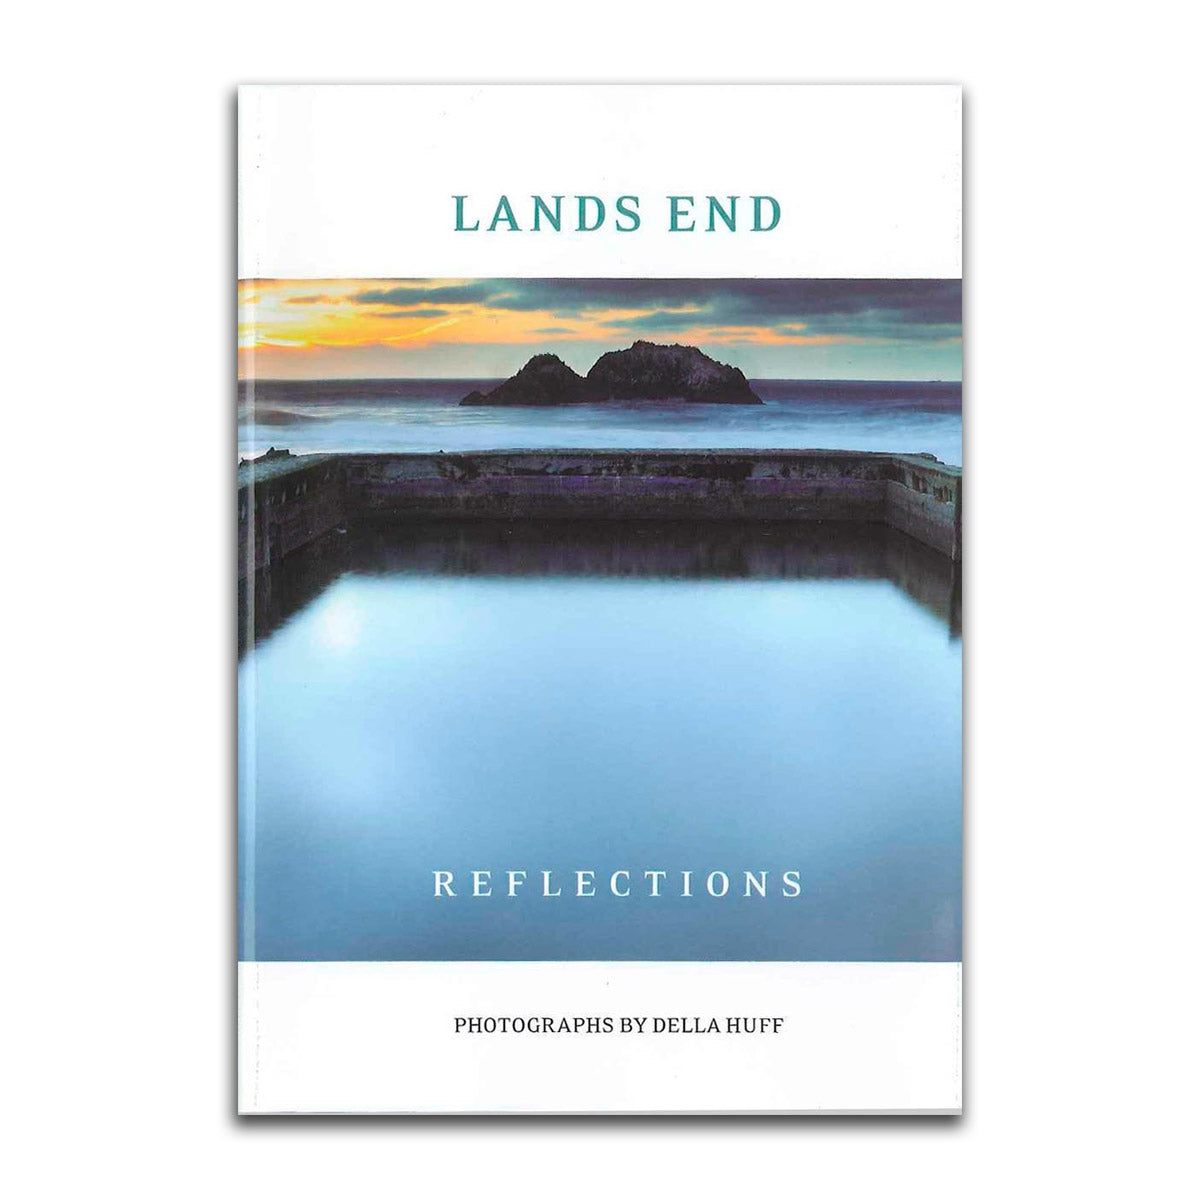 Small photo book "Lands End Reflections" with photographs by Della Huff, produced by the Golden Gate National Parks Conservancy.